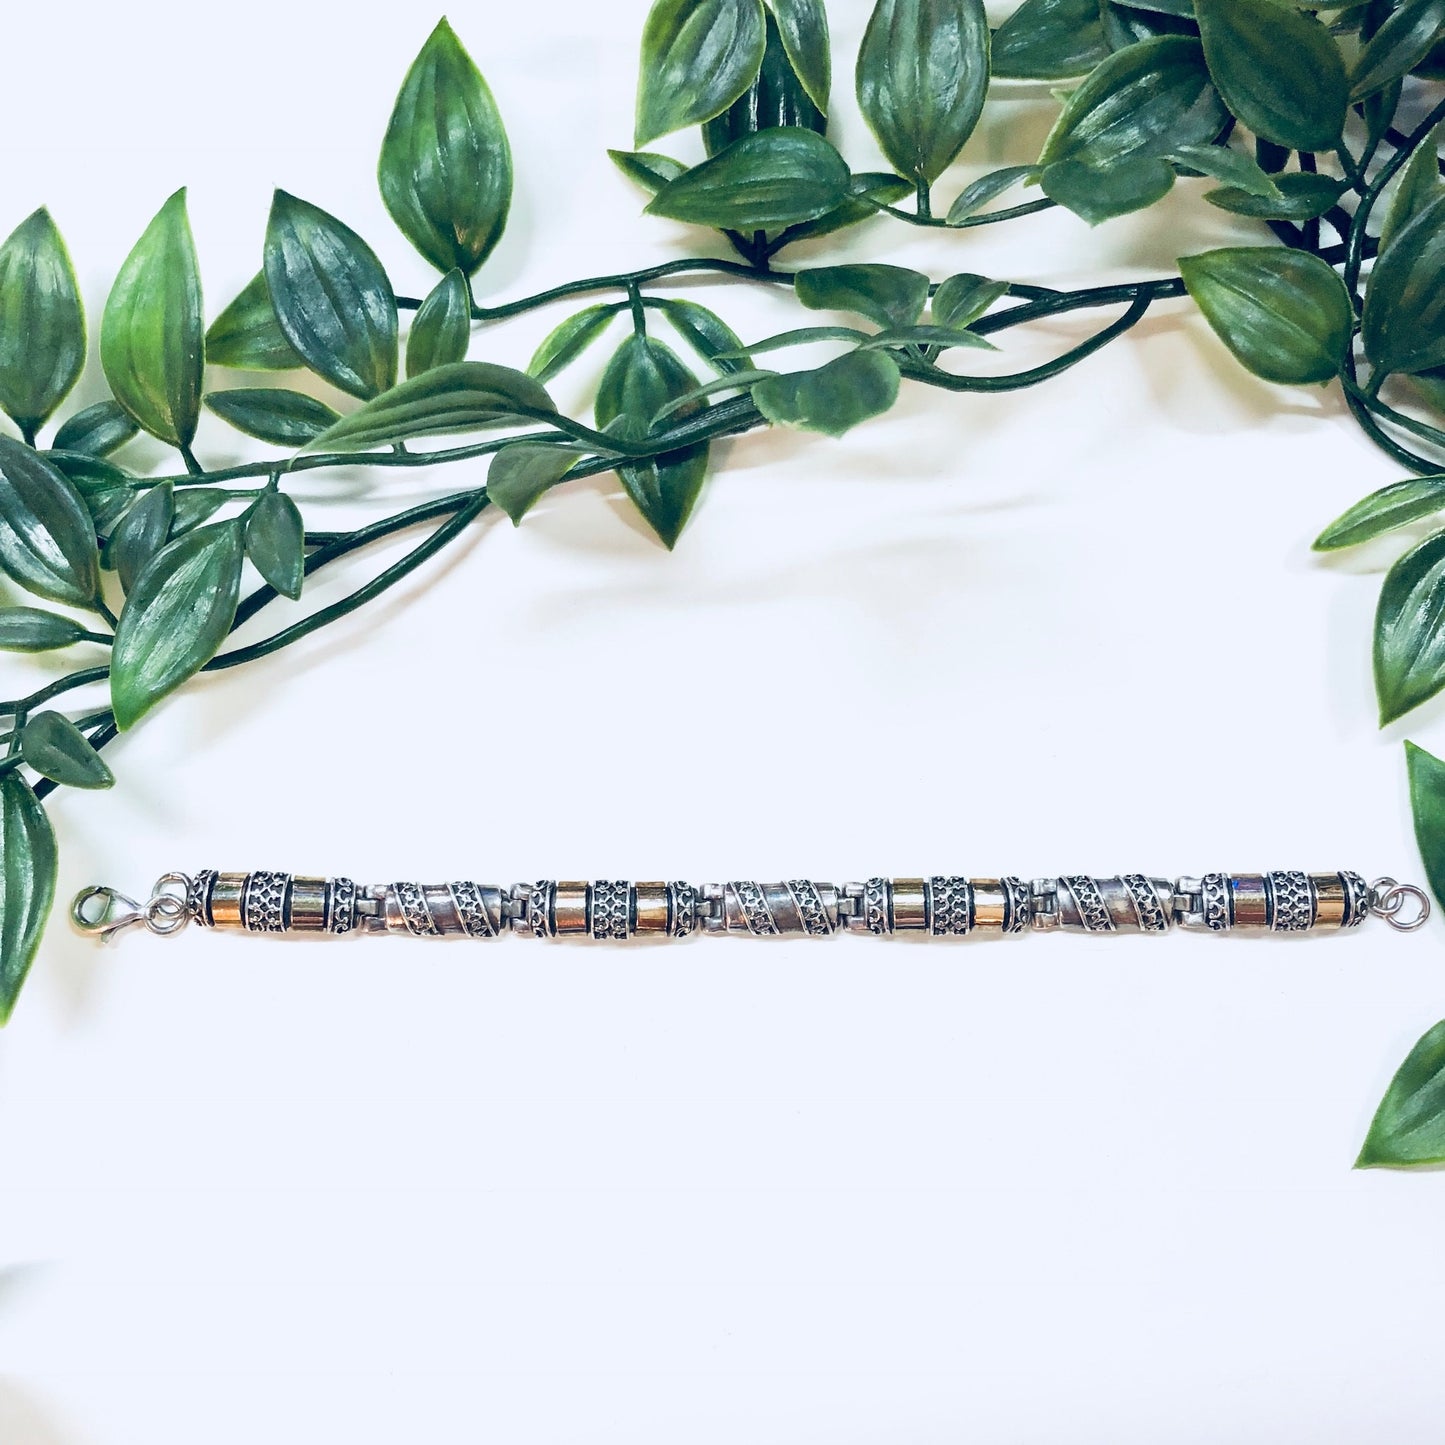 Vintage sterling silver and gold inlay link bracelet with 925 stamp, displayed on a white background with green foliage, perfect for an anniversary gift.